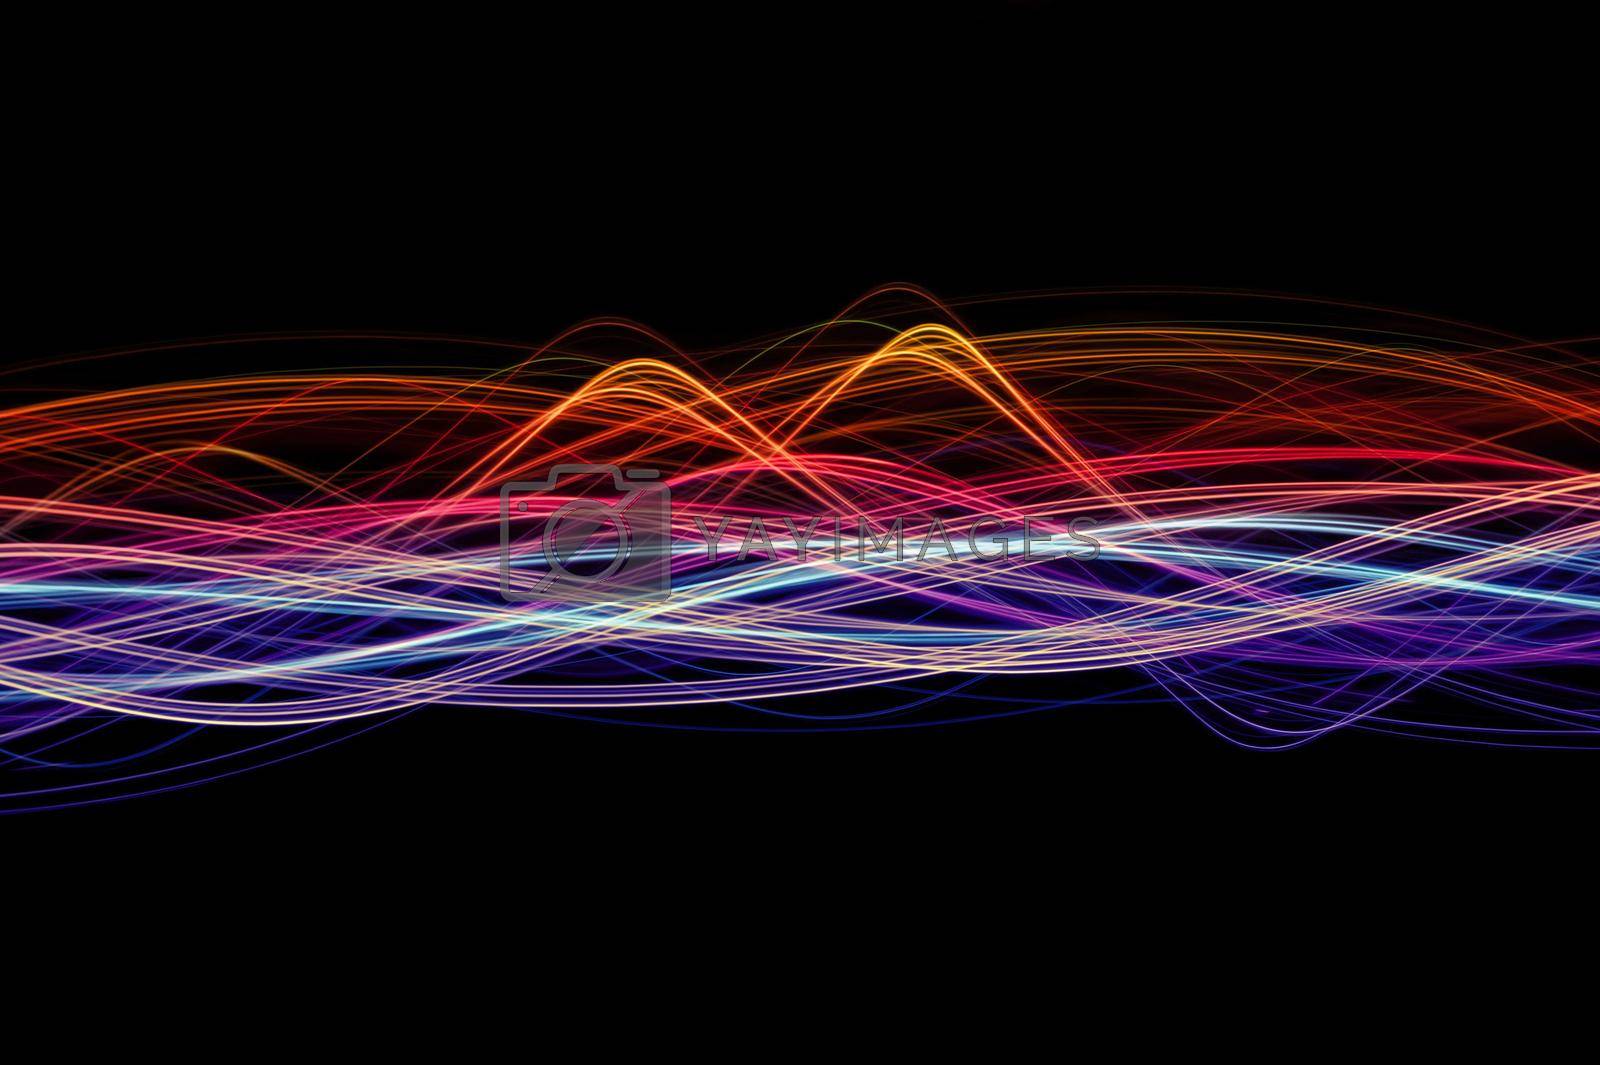 Royalty free image of audio waveforms by sanisra